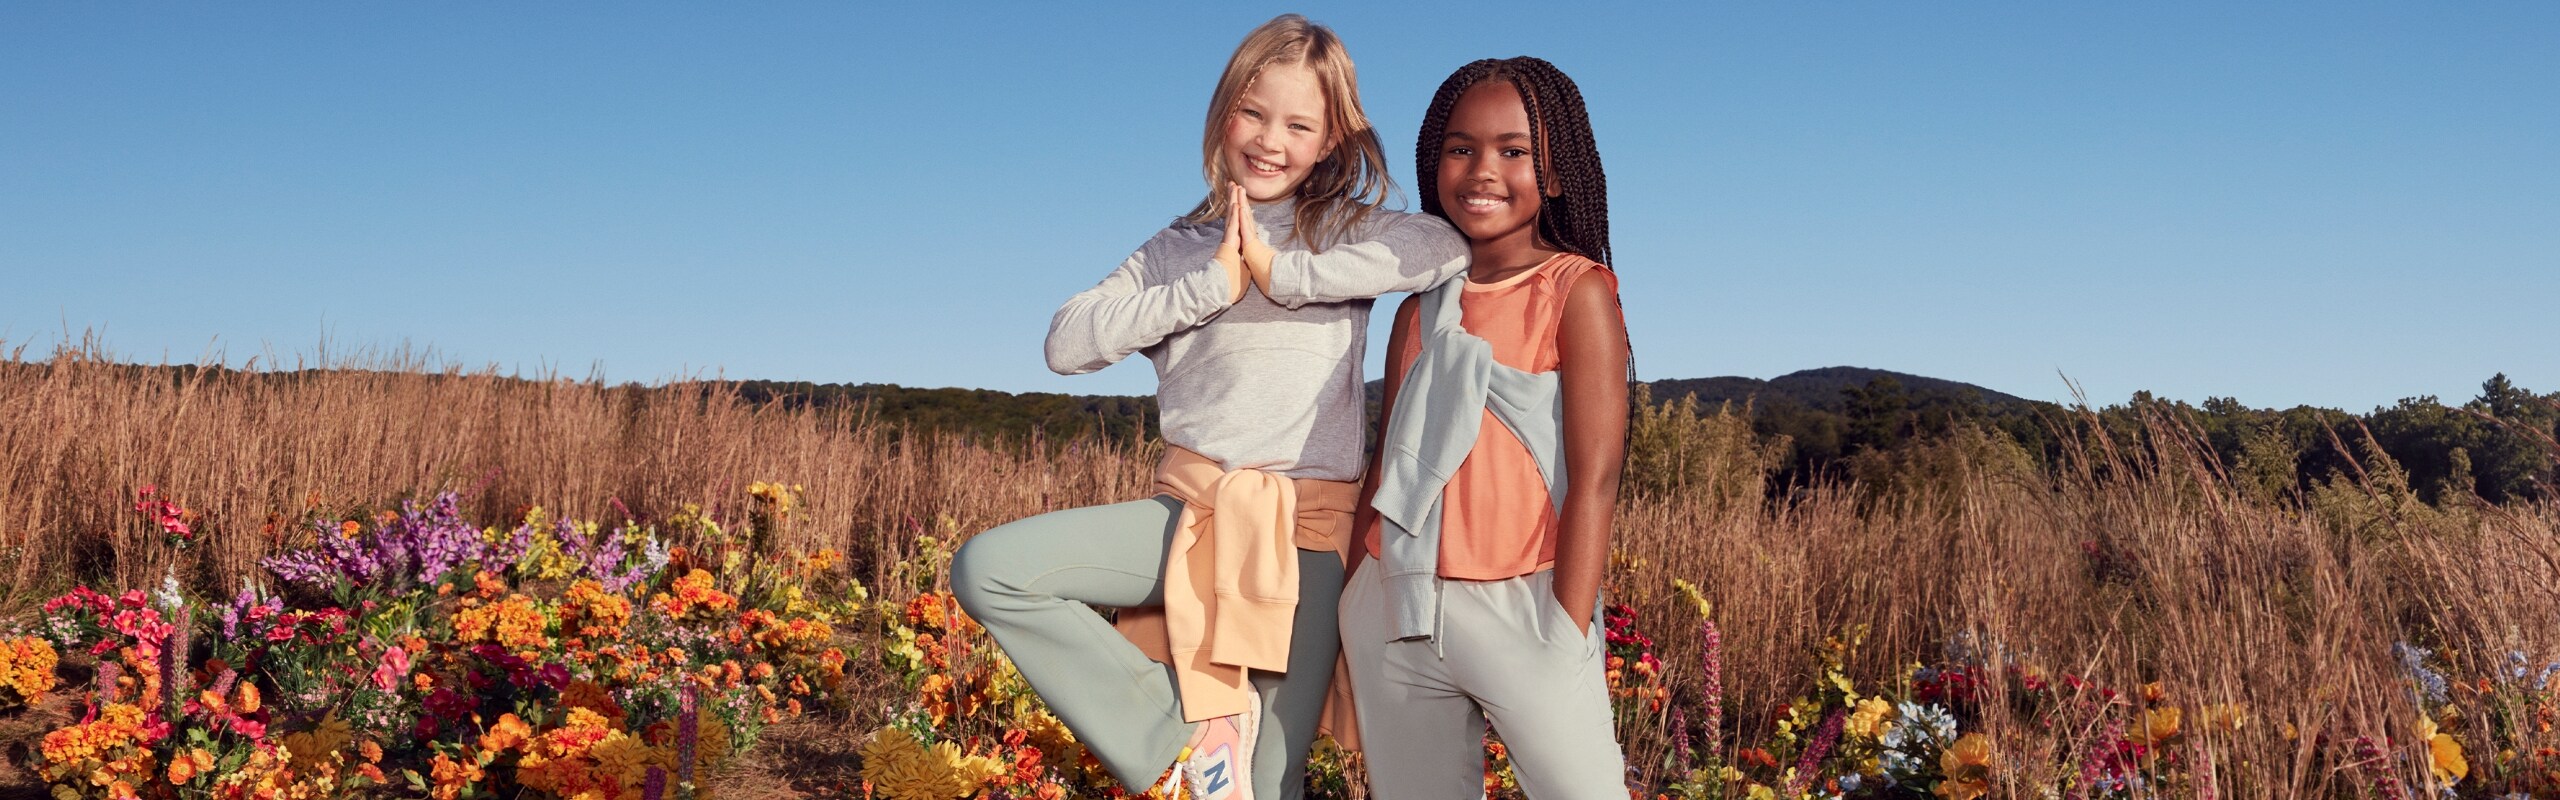 Campaign: Athleta Girl. What's Everyone Loving.